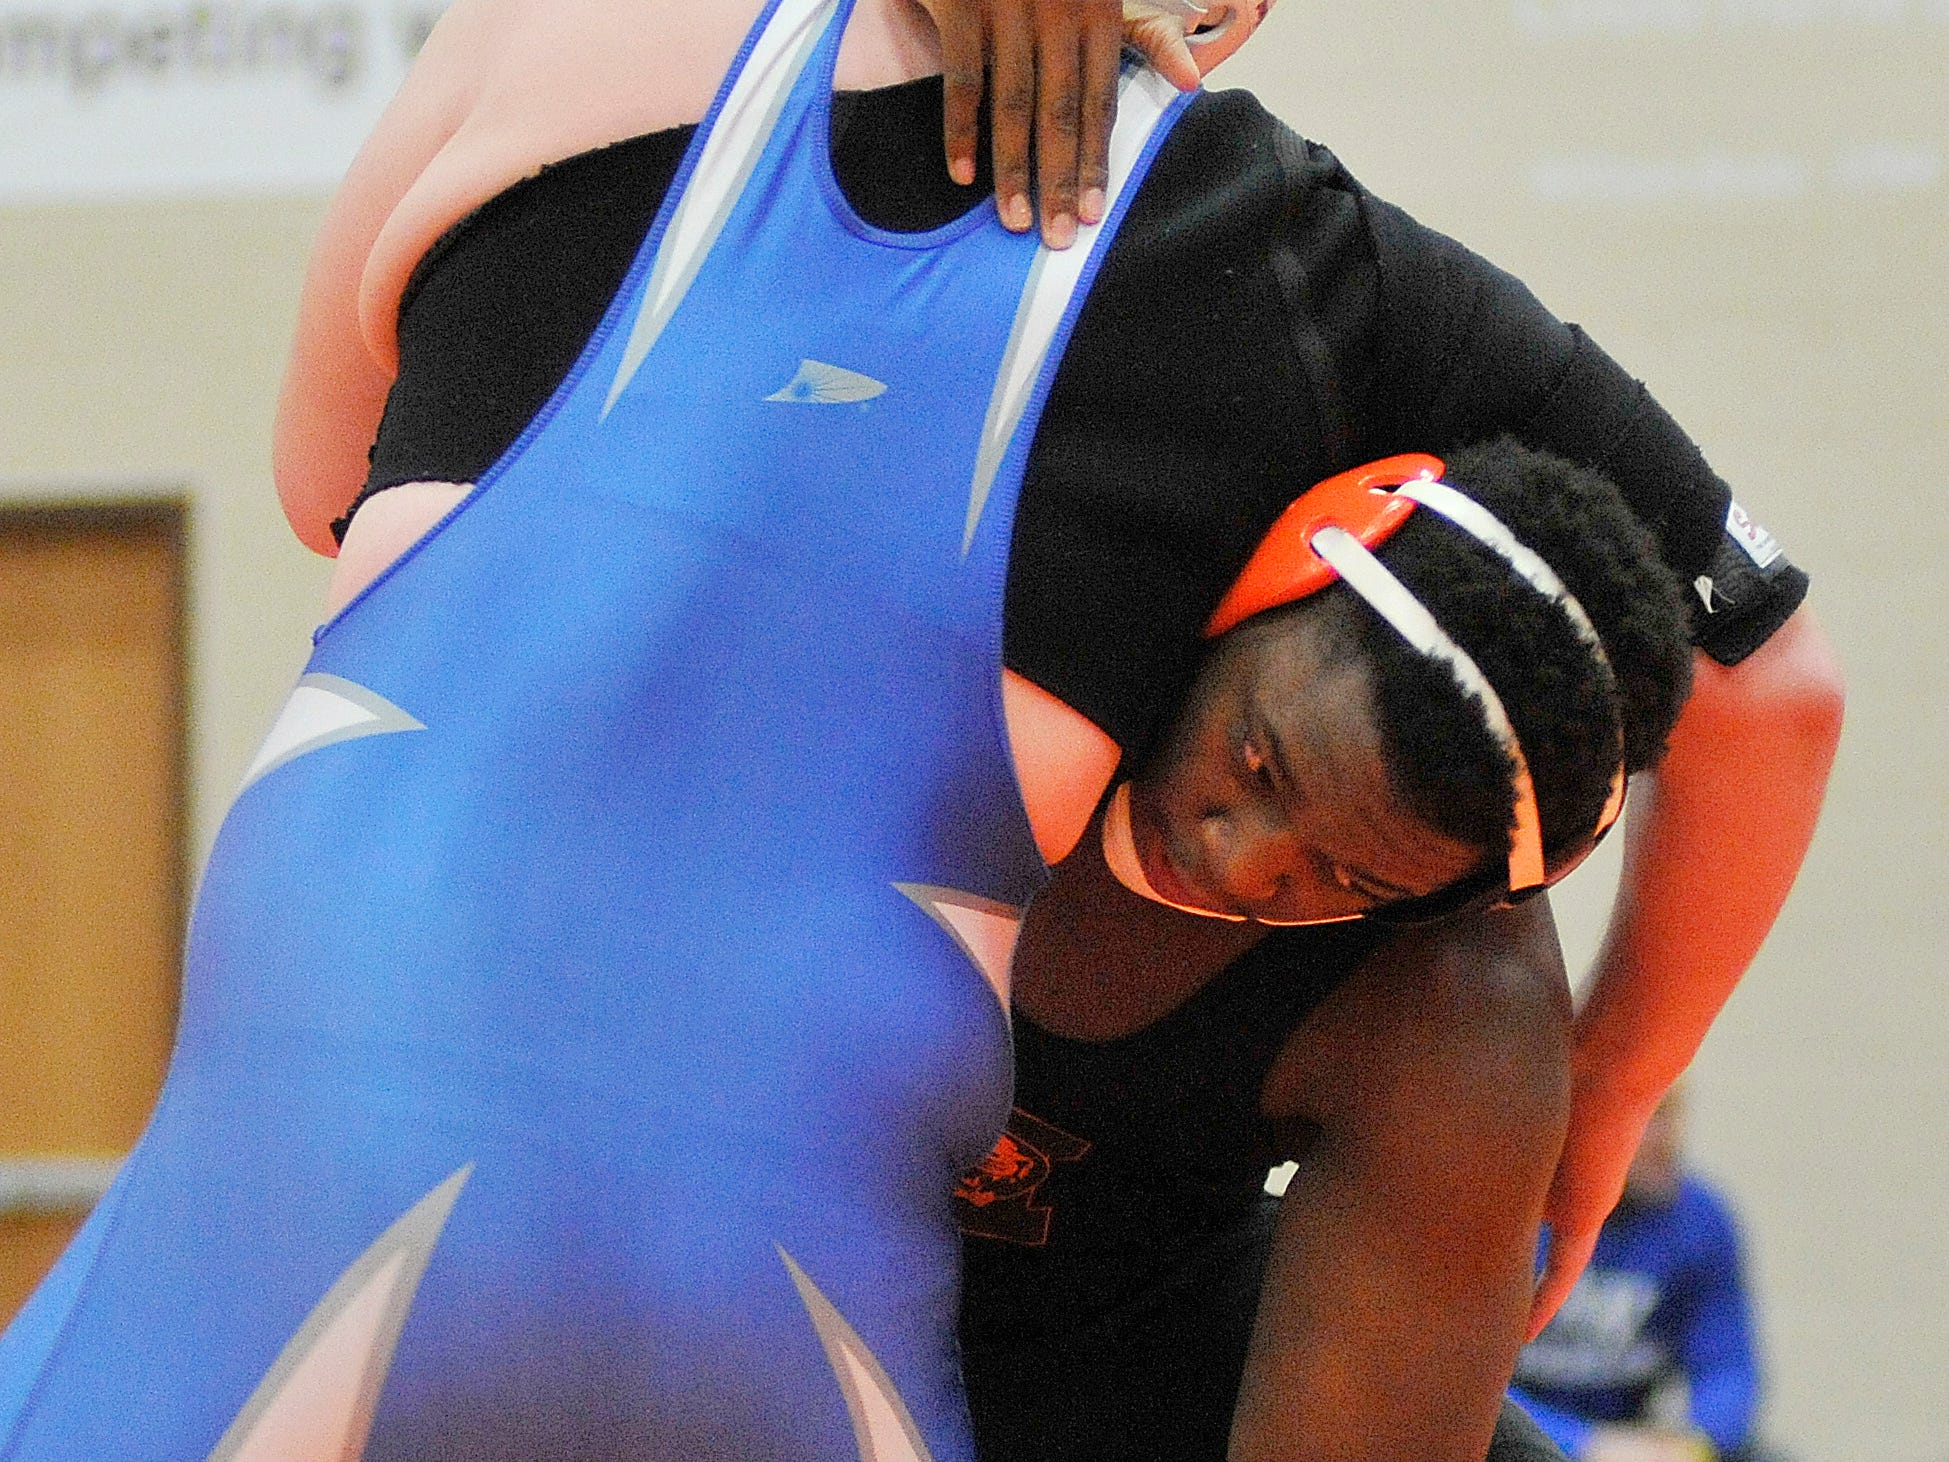 Mansfield Senior’s Brandon Myers pins Findlay’s Dewey Lee in 37 seconds in Saturday’s 220-pound finals of the Division I sectional meet in Pete Henry Gym.